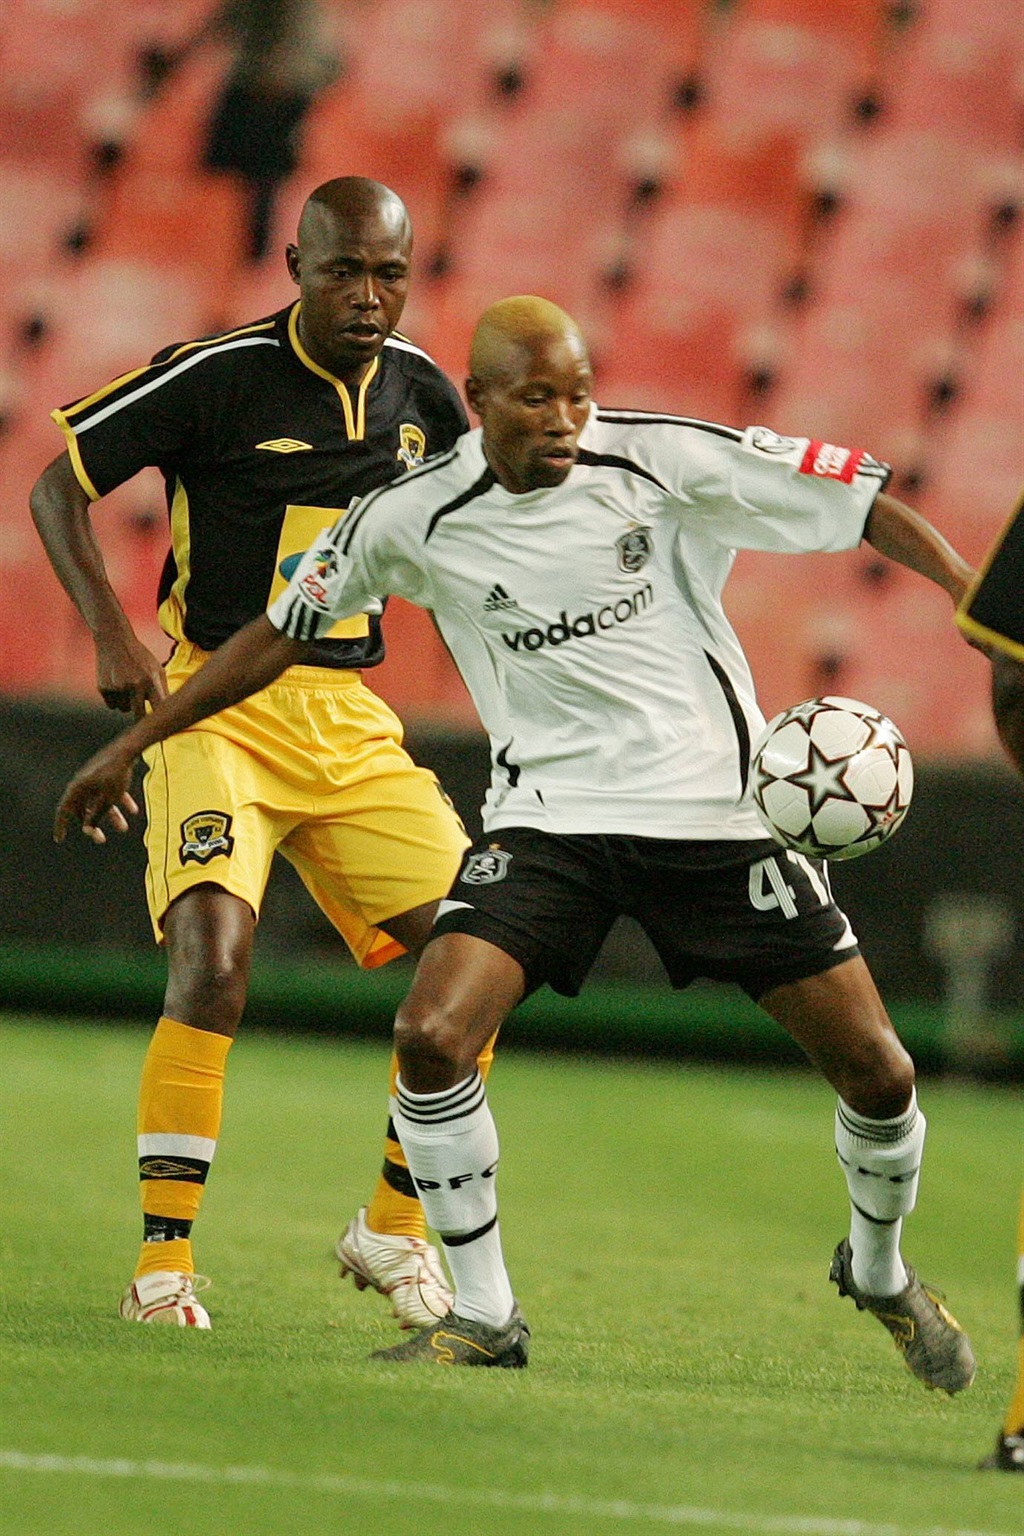 JOHANNESBURG, SOUTH AFRICA - JANUARY 17: Mandla Zwane of the Black Leopards and Jorry Merahe of the Orlando Pirates during the PSL match at the Ellis Park stadium on January 17, 2007 in Johannesburg, South Africa. (Photo by Gallo Images/Getty Images)